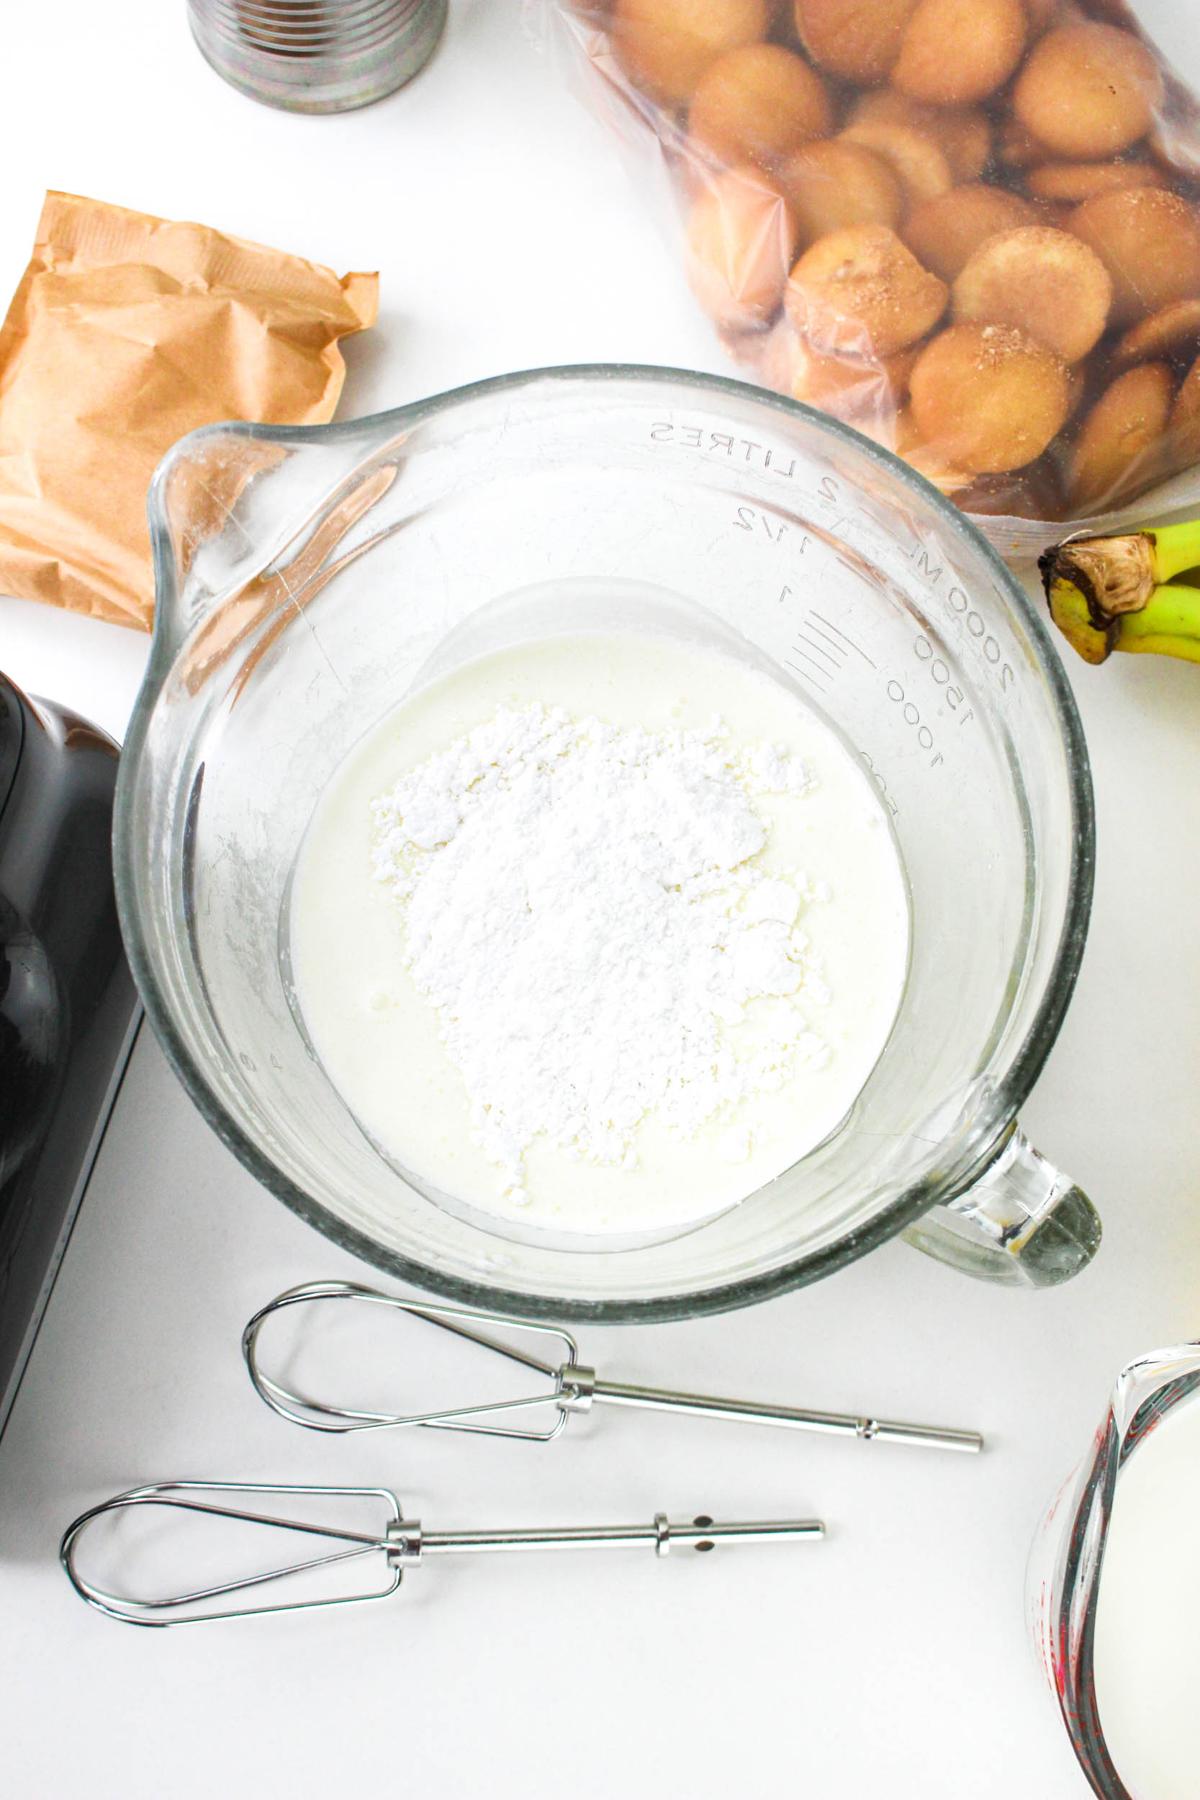 Heavy whipping cream and powdered sugar in a measuring cup.